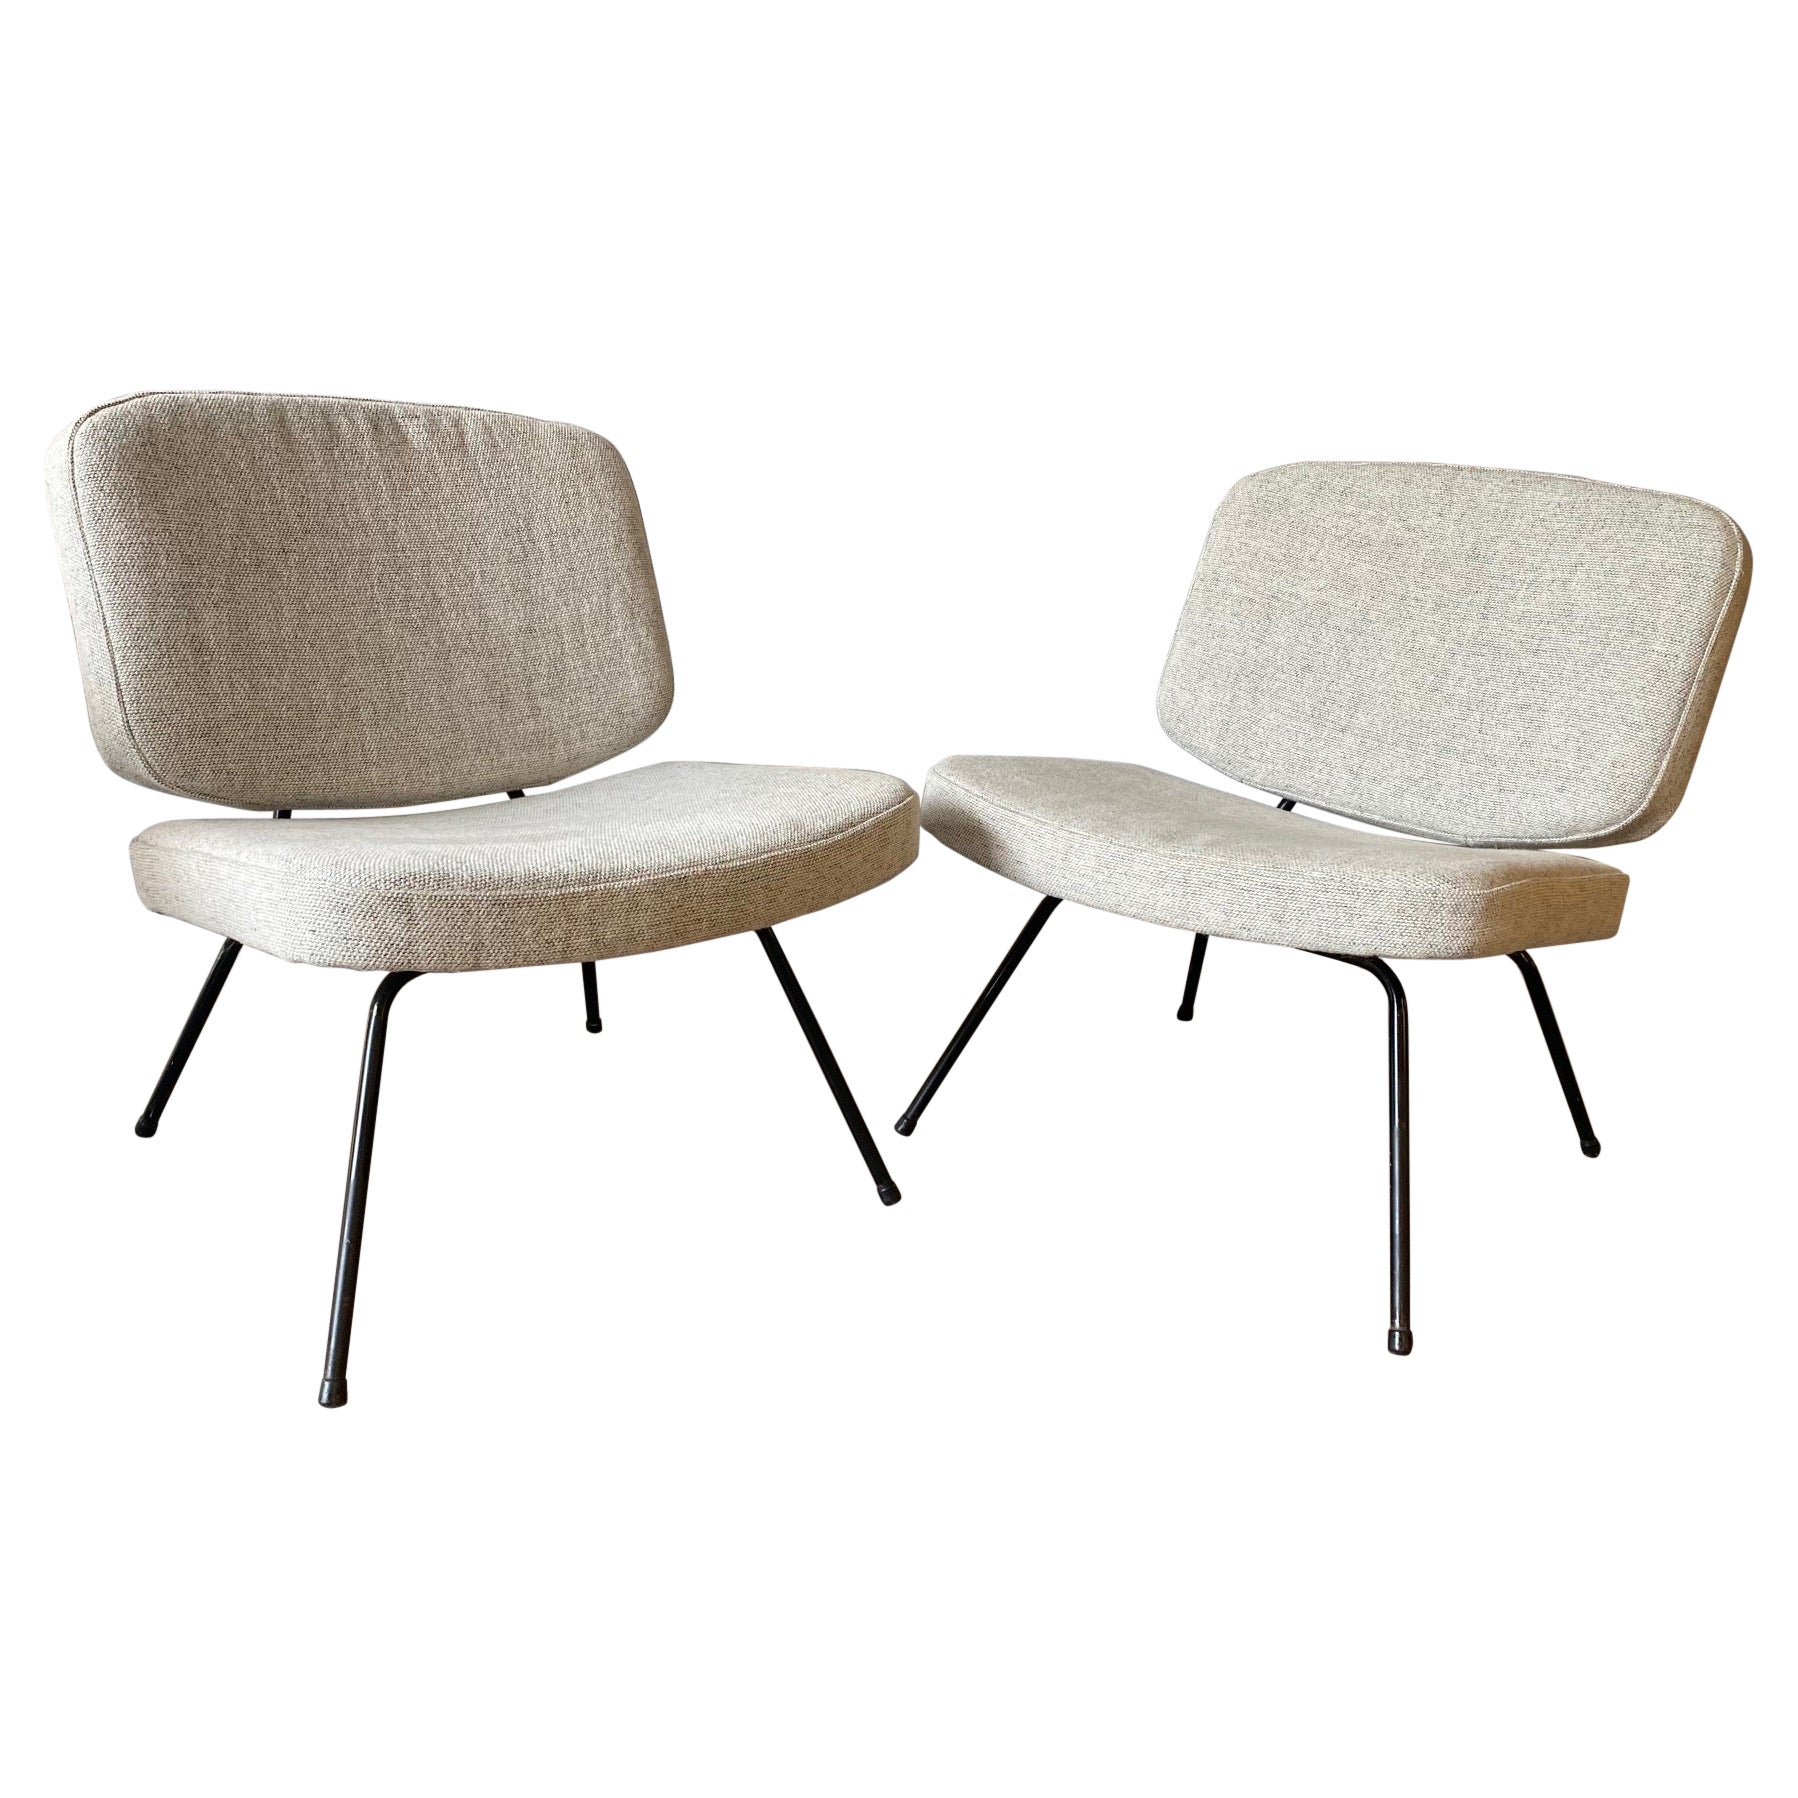 Pair of Cm190 Slipper Chairs by Pierre Paulin for Thonet, France, 1950s For Sale